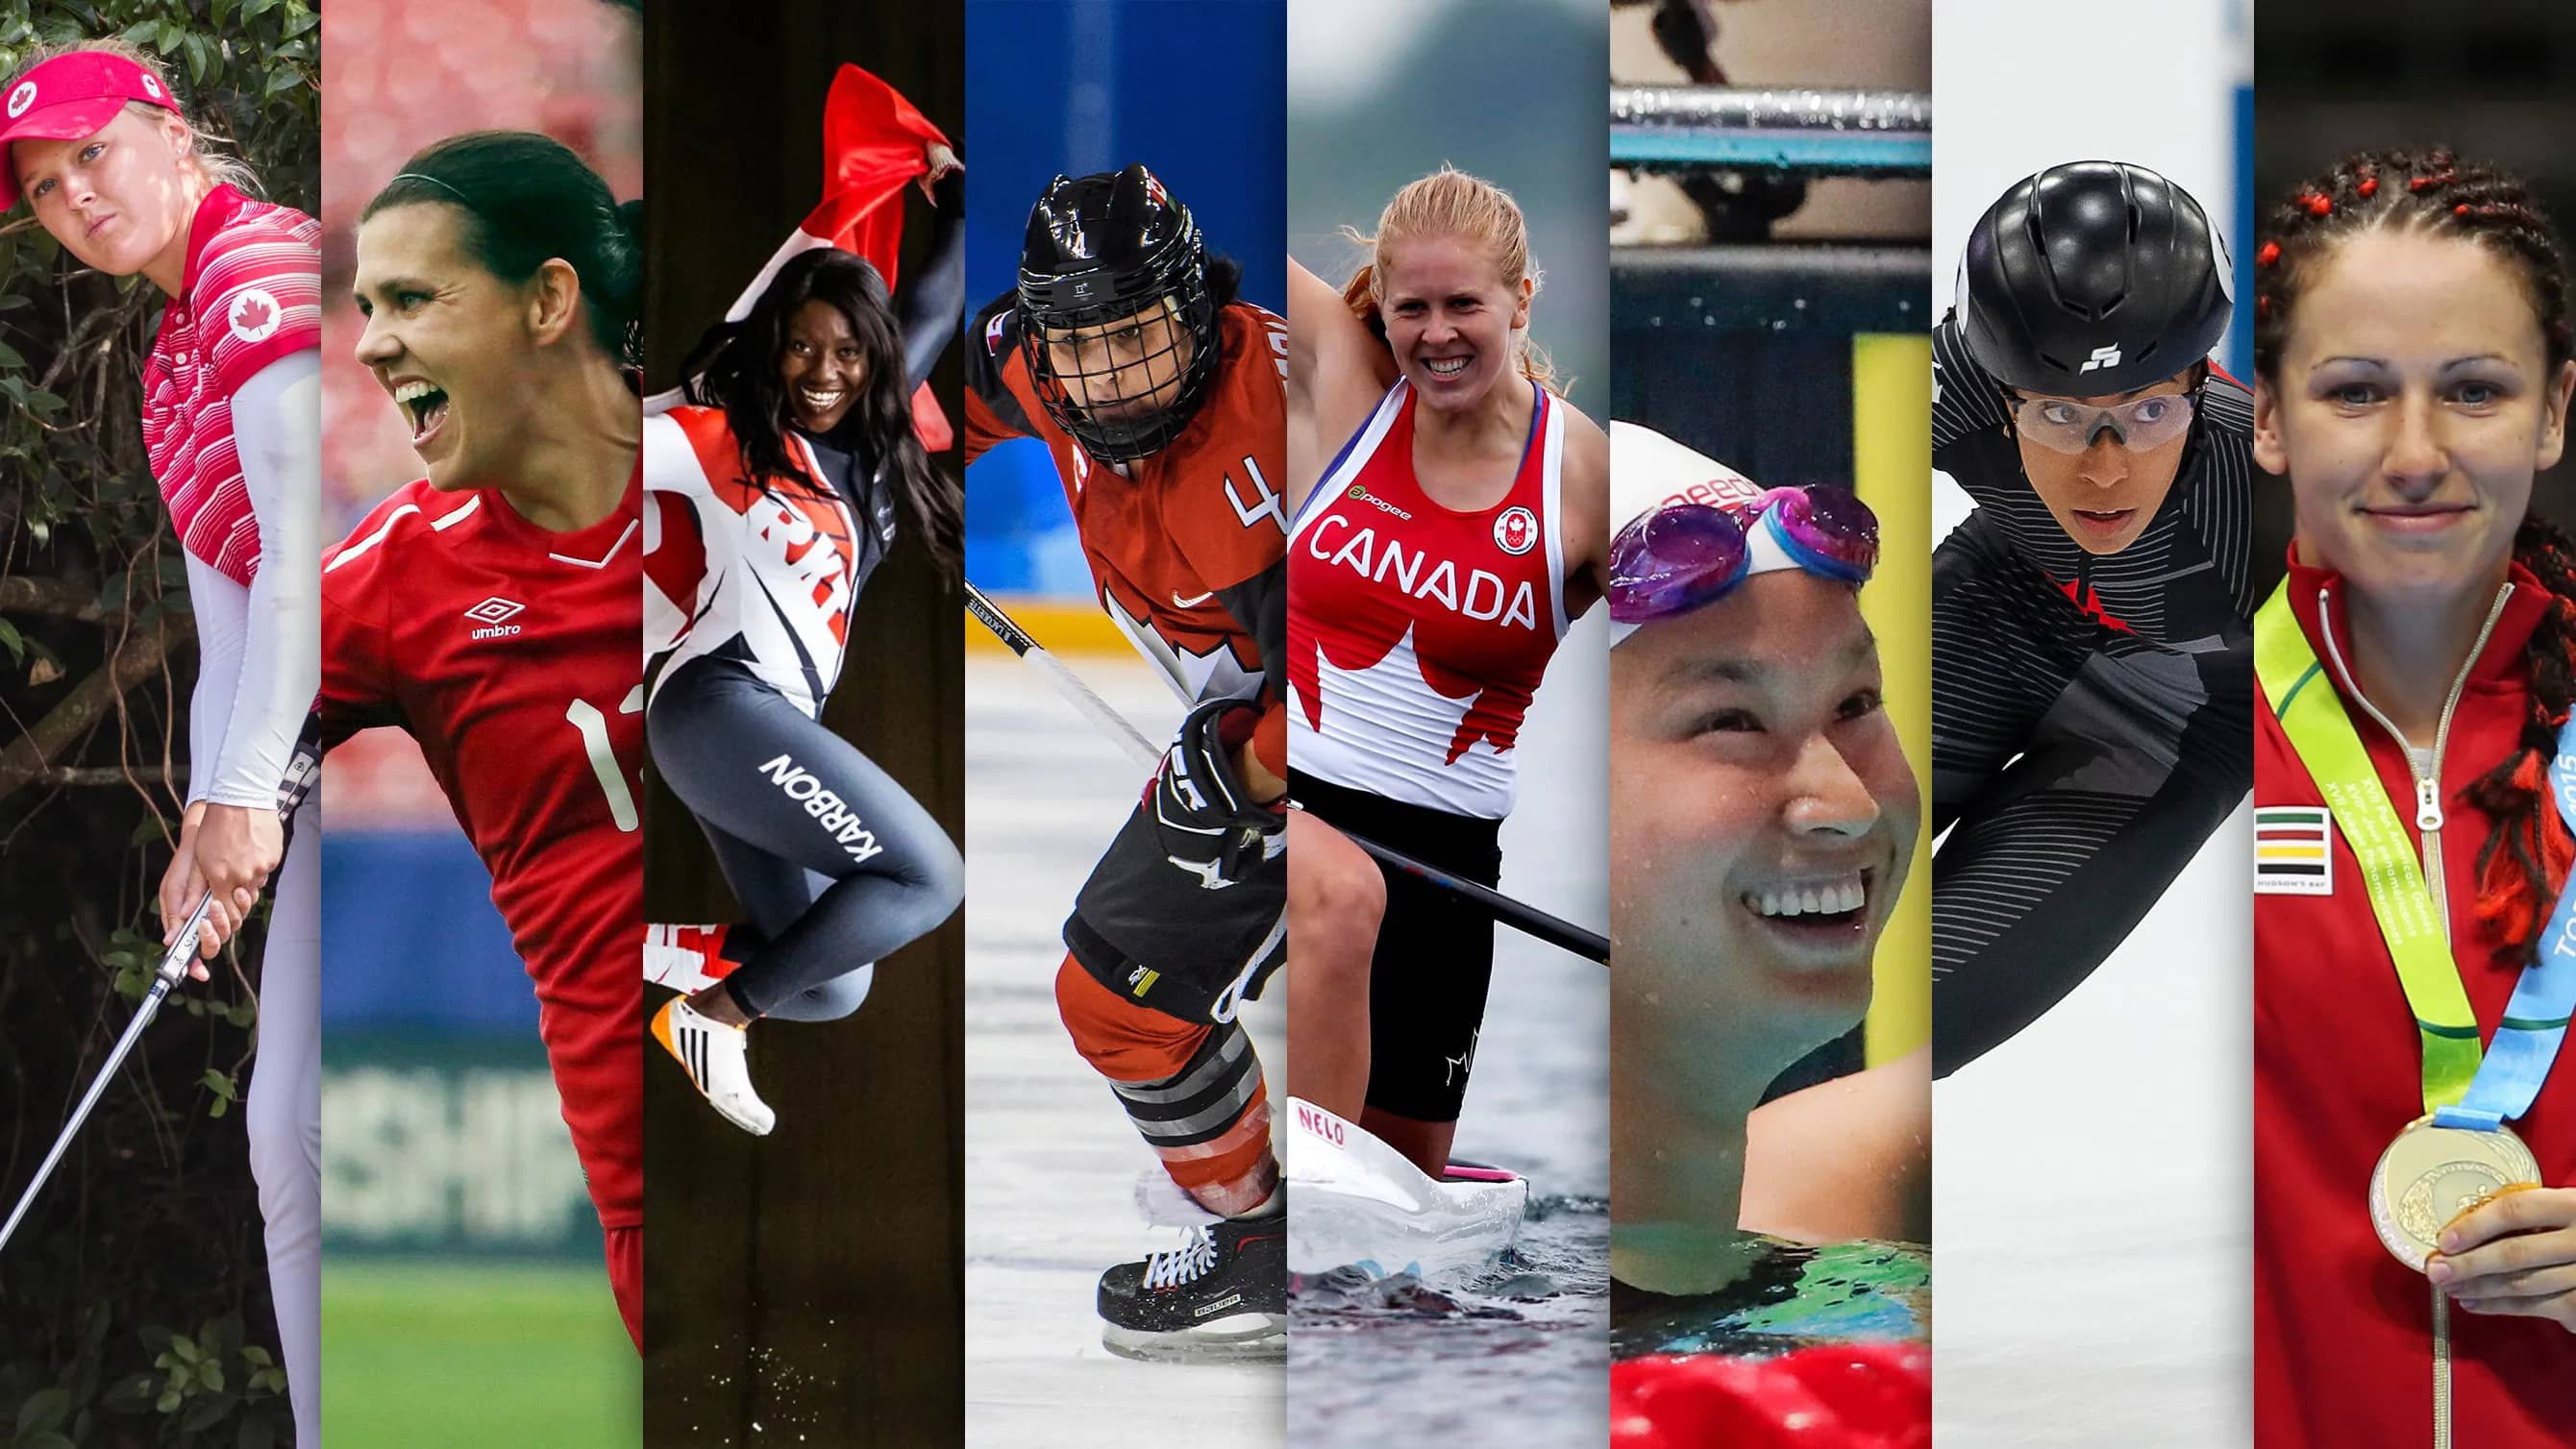 Top 10 Most Popular Sports of Canada